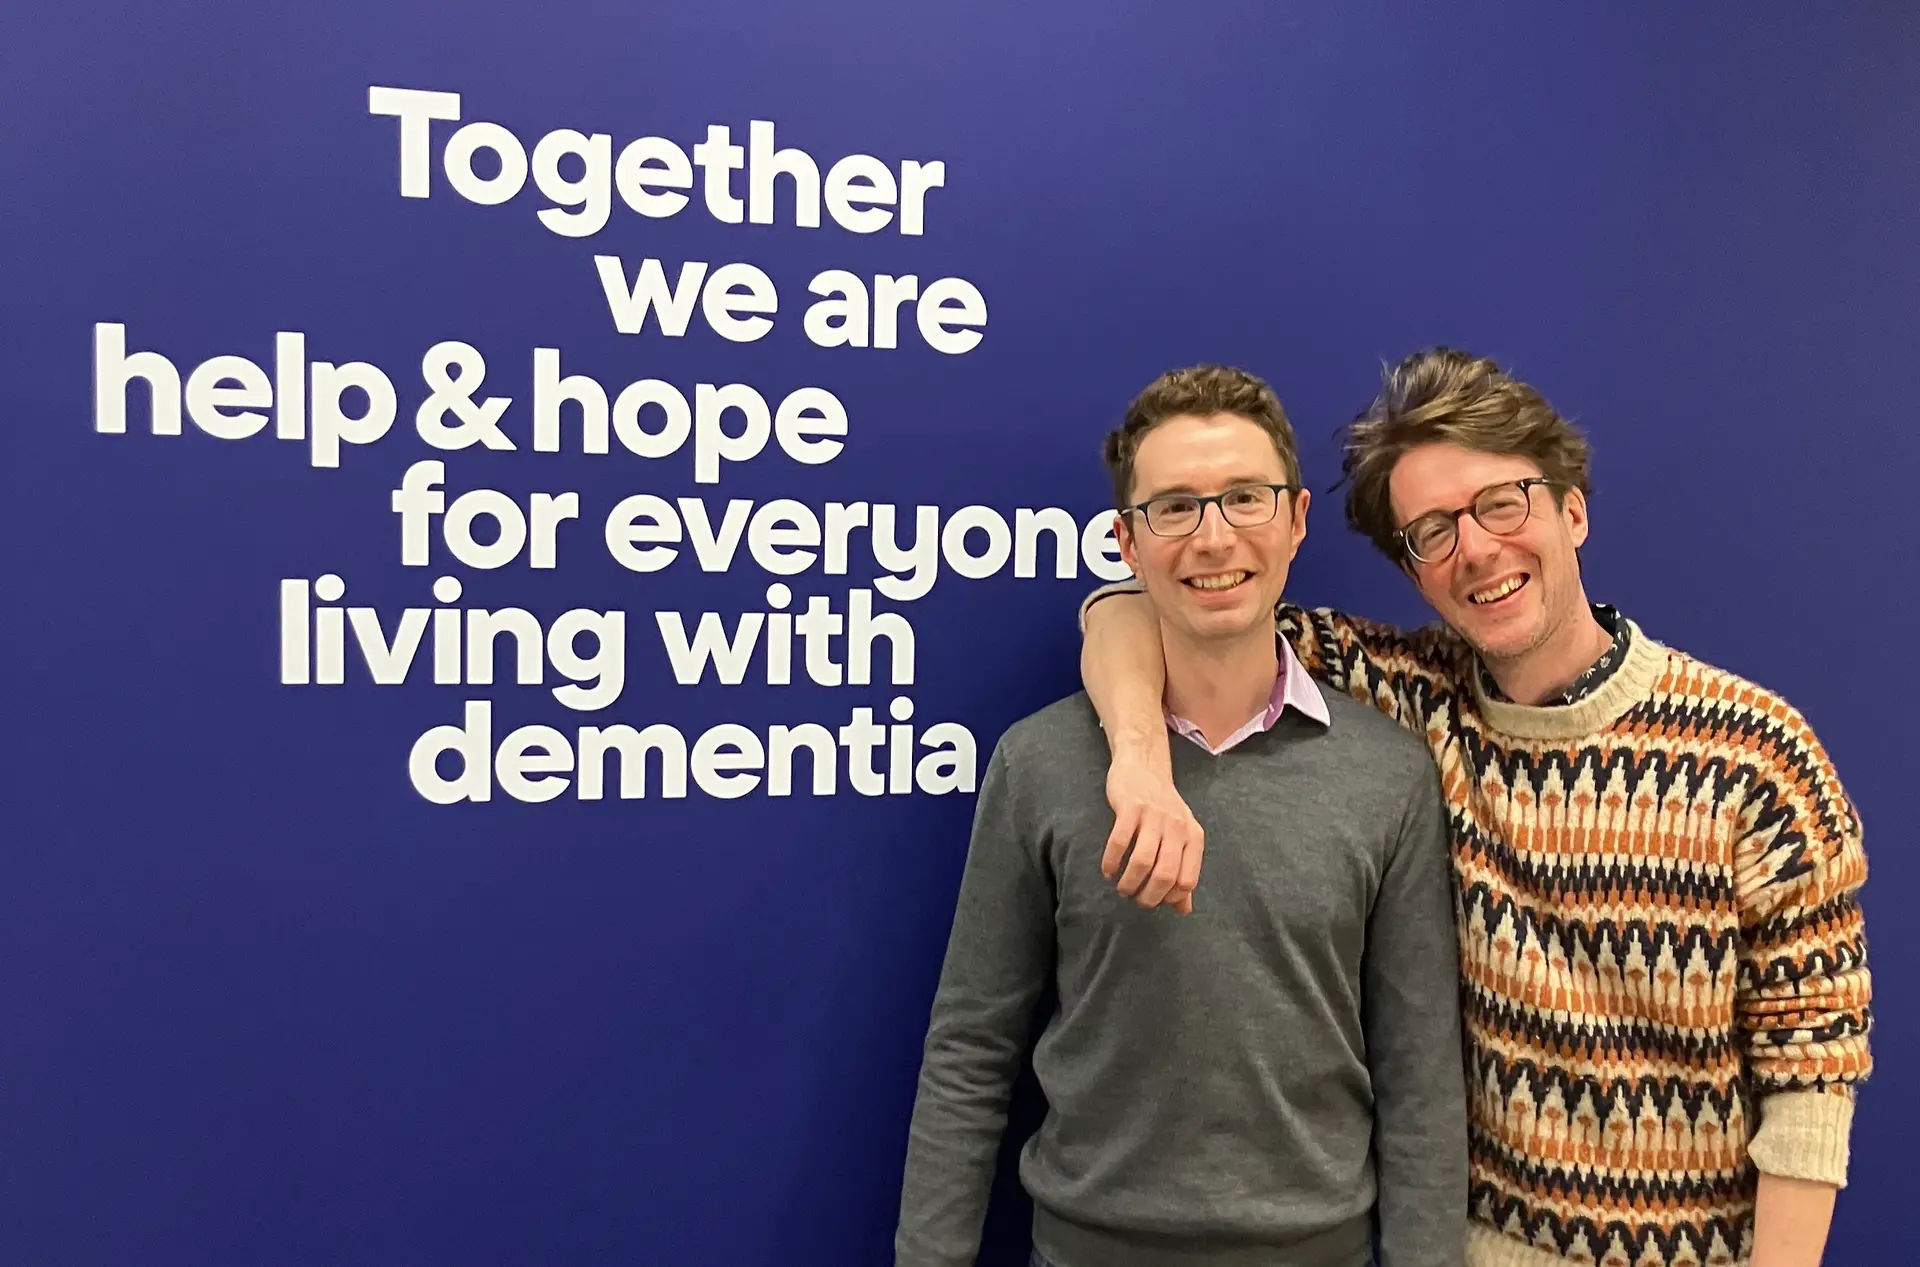 Phylax partners with the Alzheimer’s Society